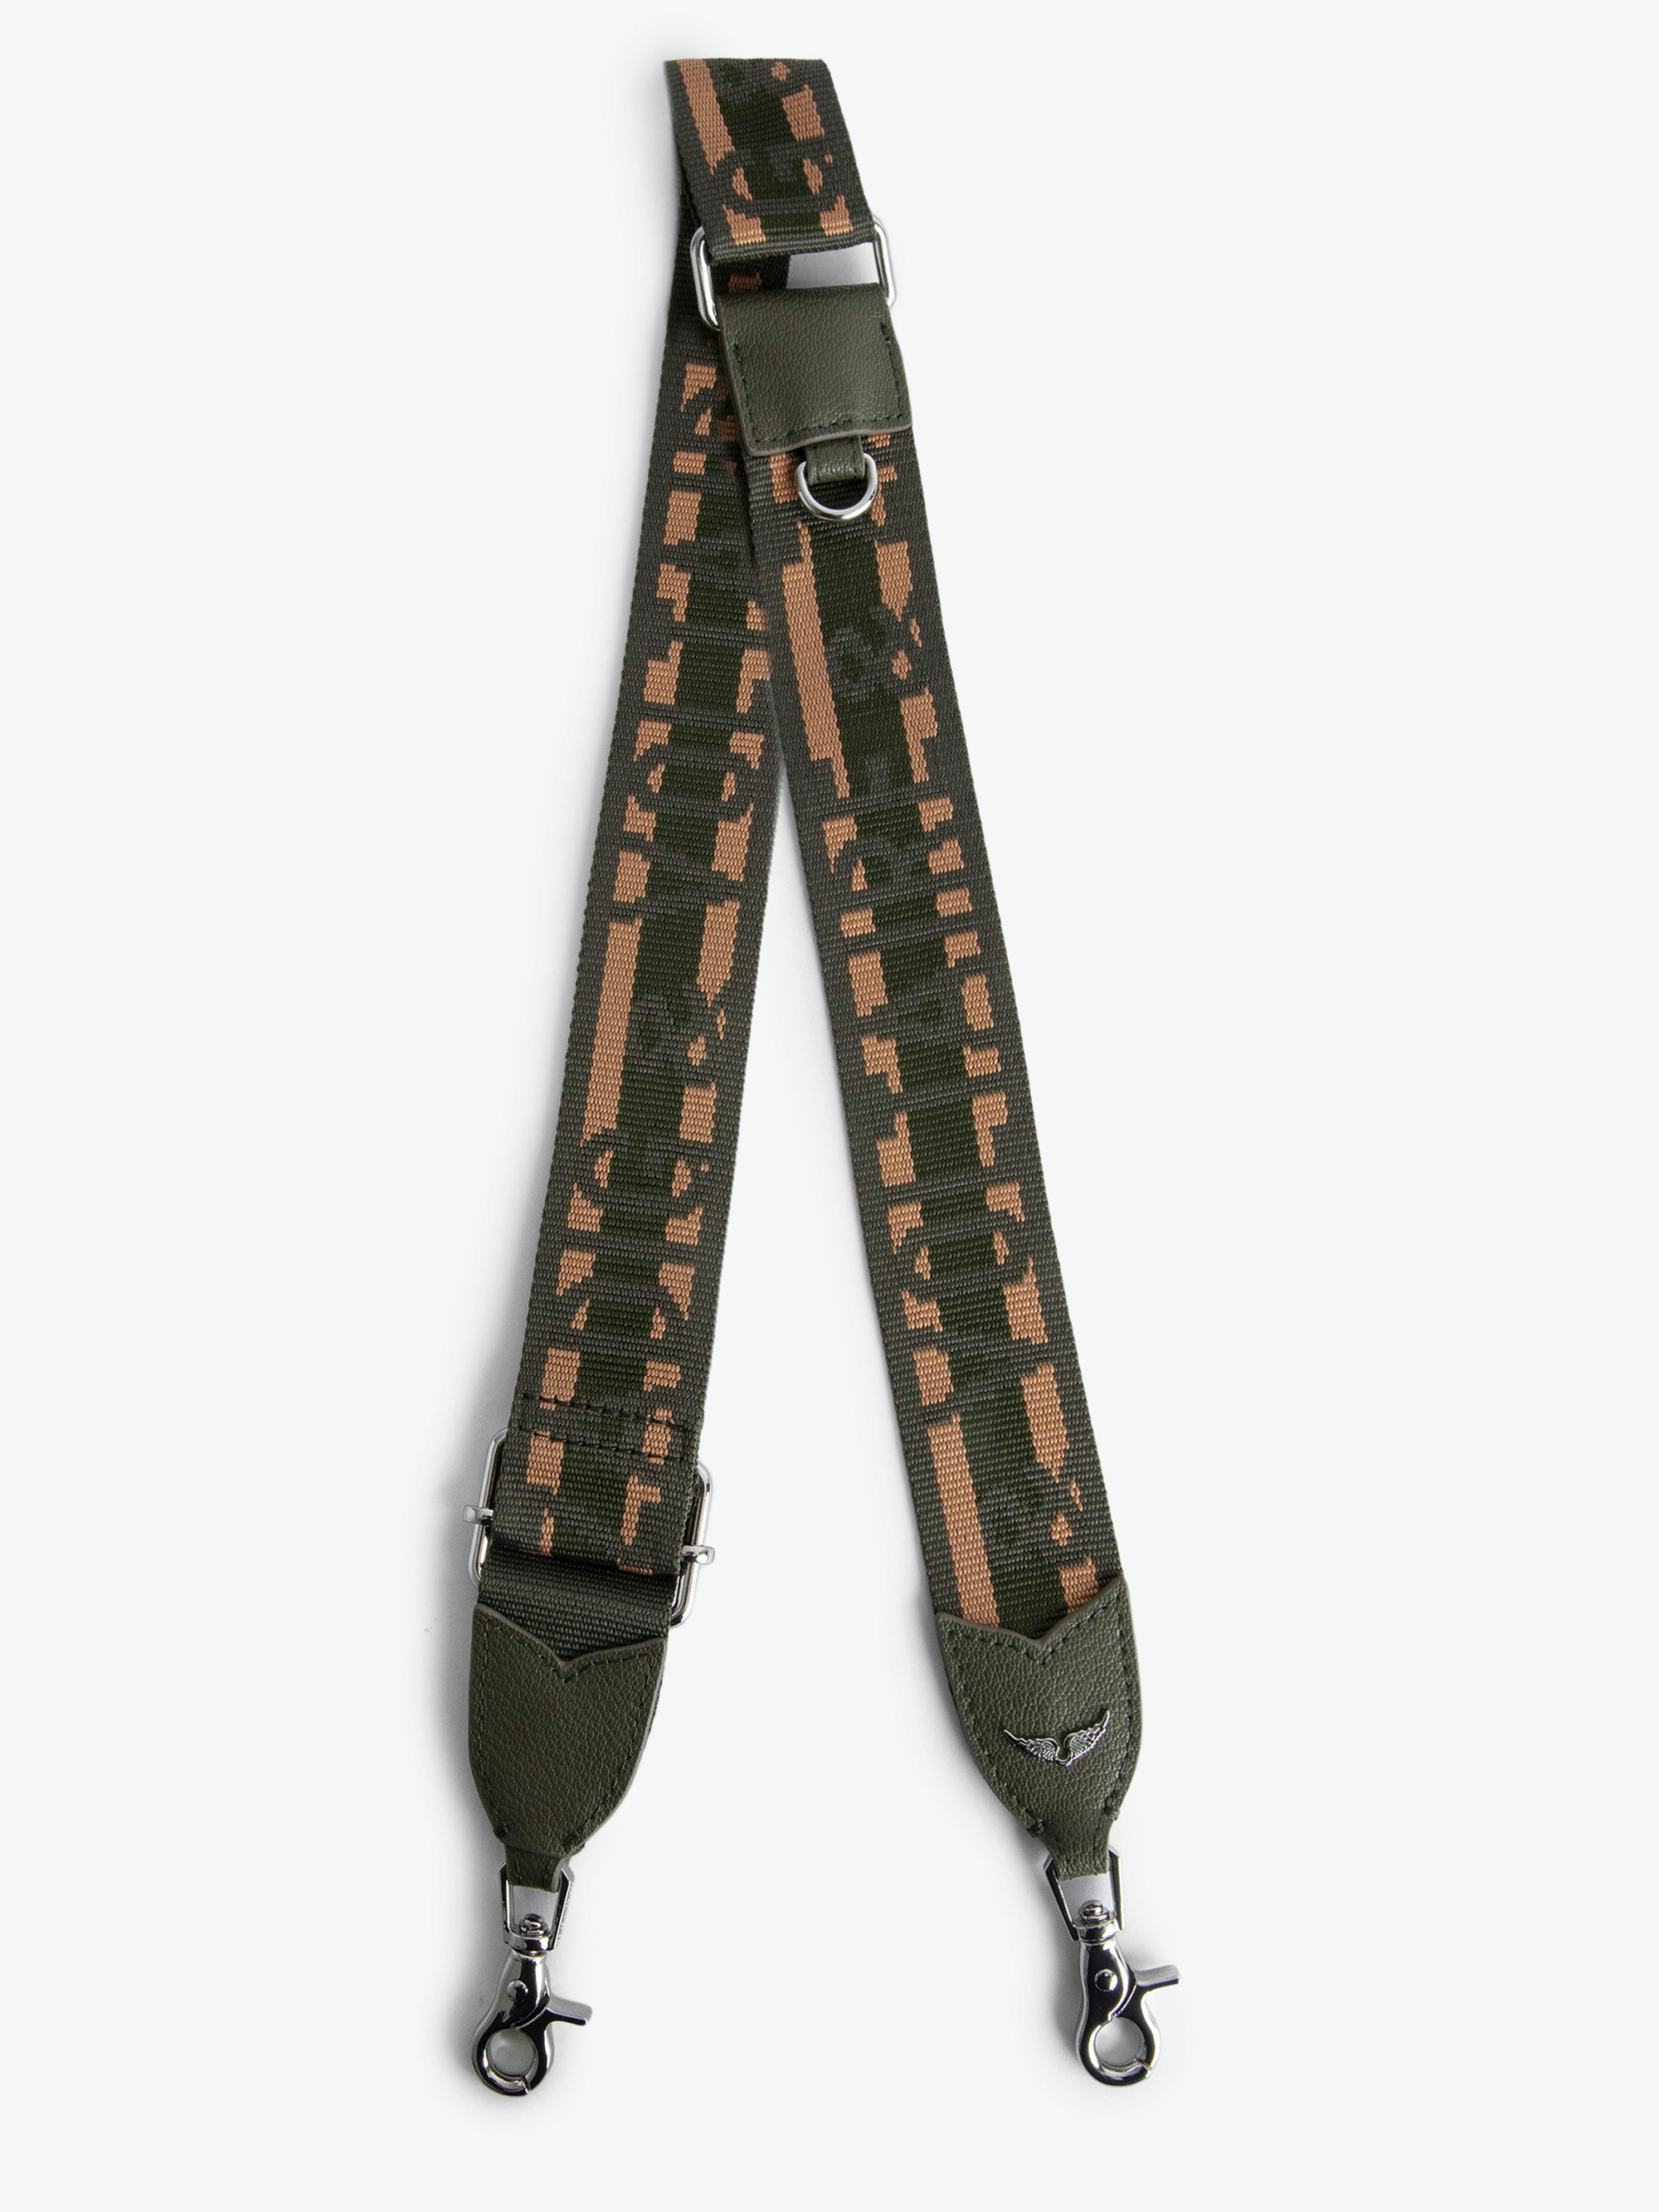 Zadig Shoulder Strap - Khaki leather and nylon shoulder strap with "Zadig & Voltaire" logo and wings motif.